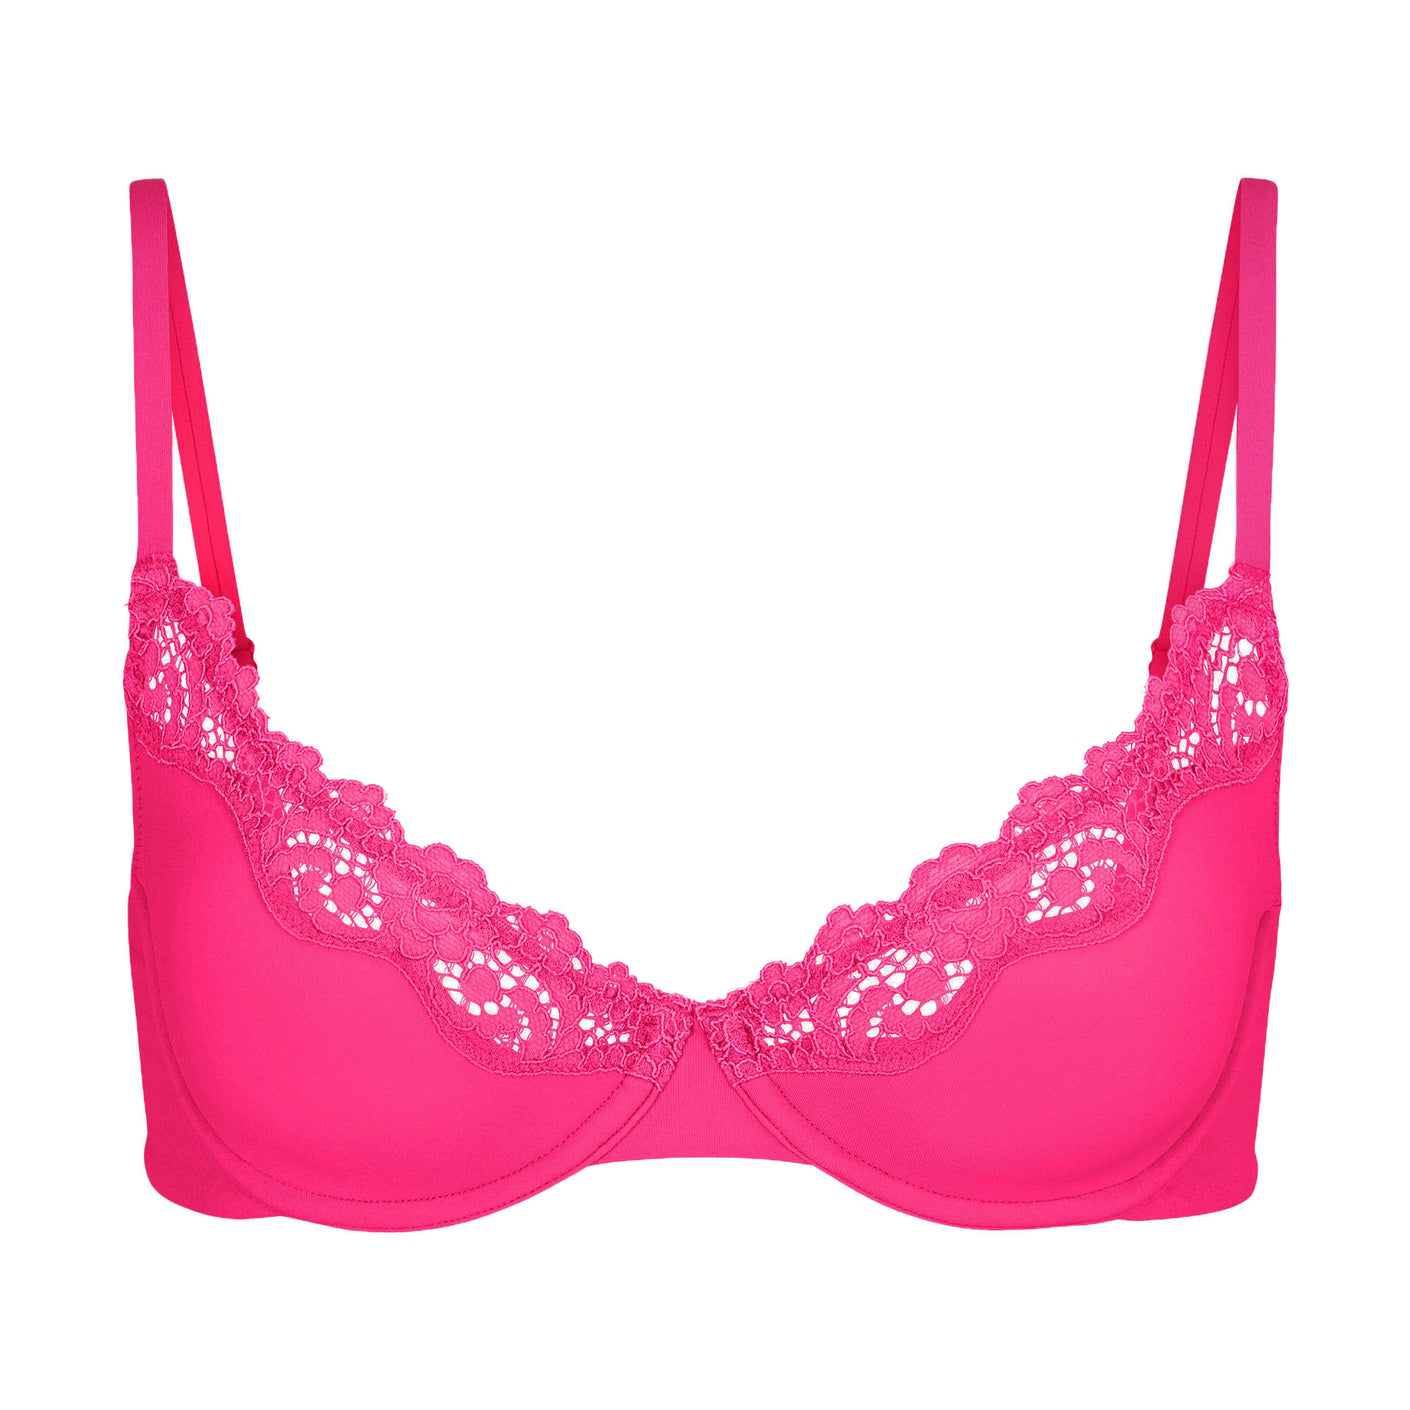 SKIMS FITS EVERYBODY CORDED LACE TRIANGLE BRALETTE CHERRY BLOSSOM XS Pink -  $36 New With Tags - From Vanilla